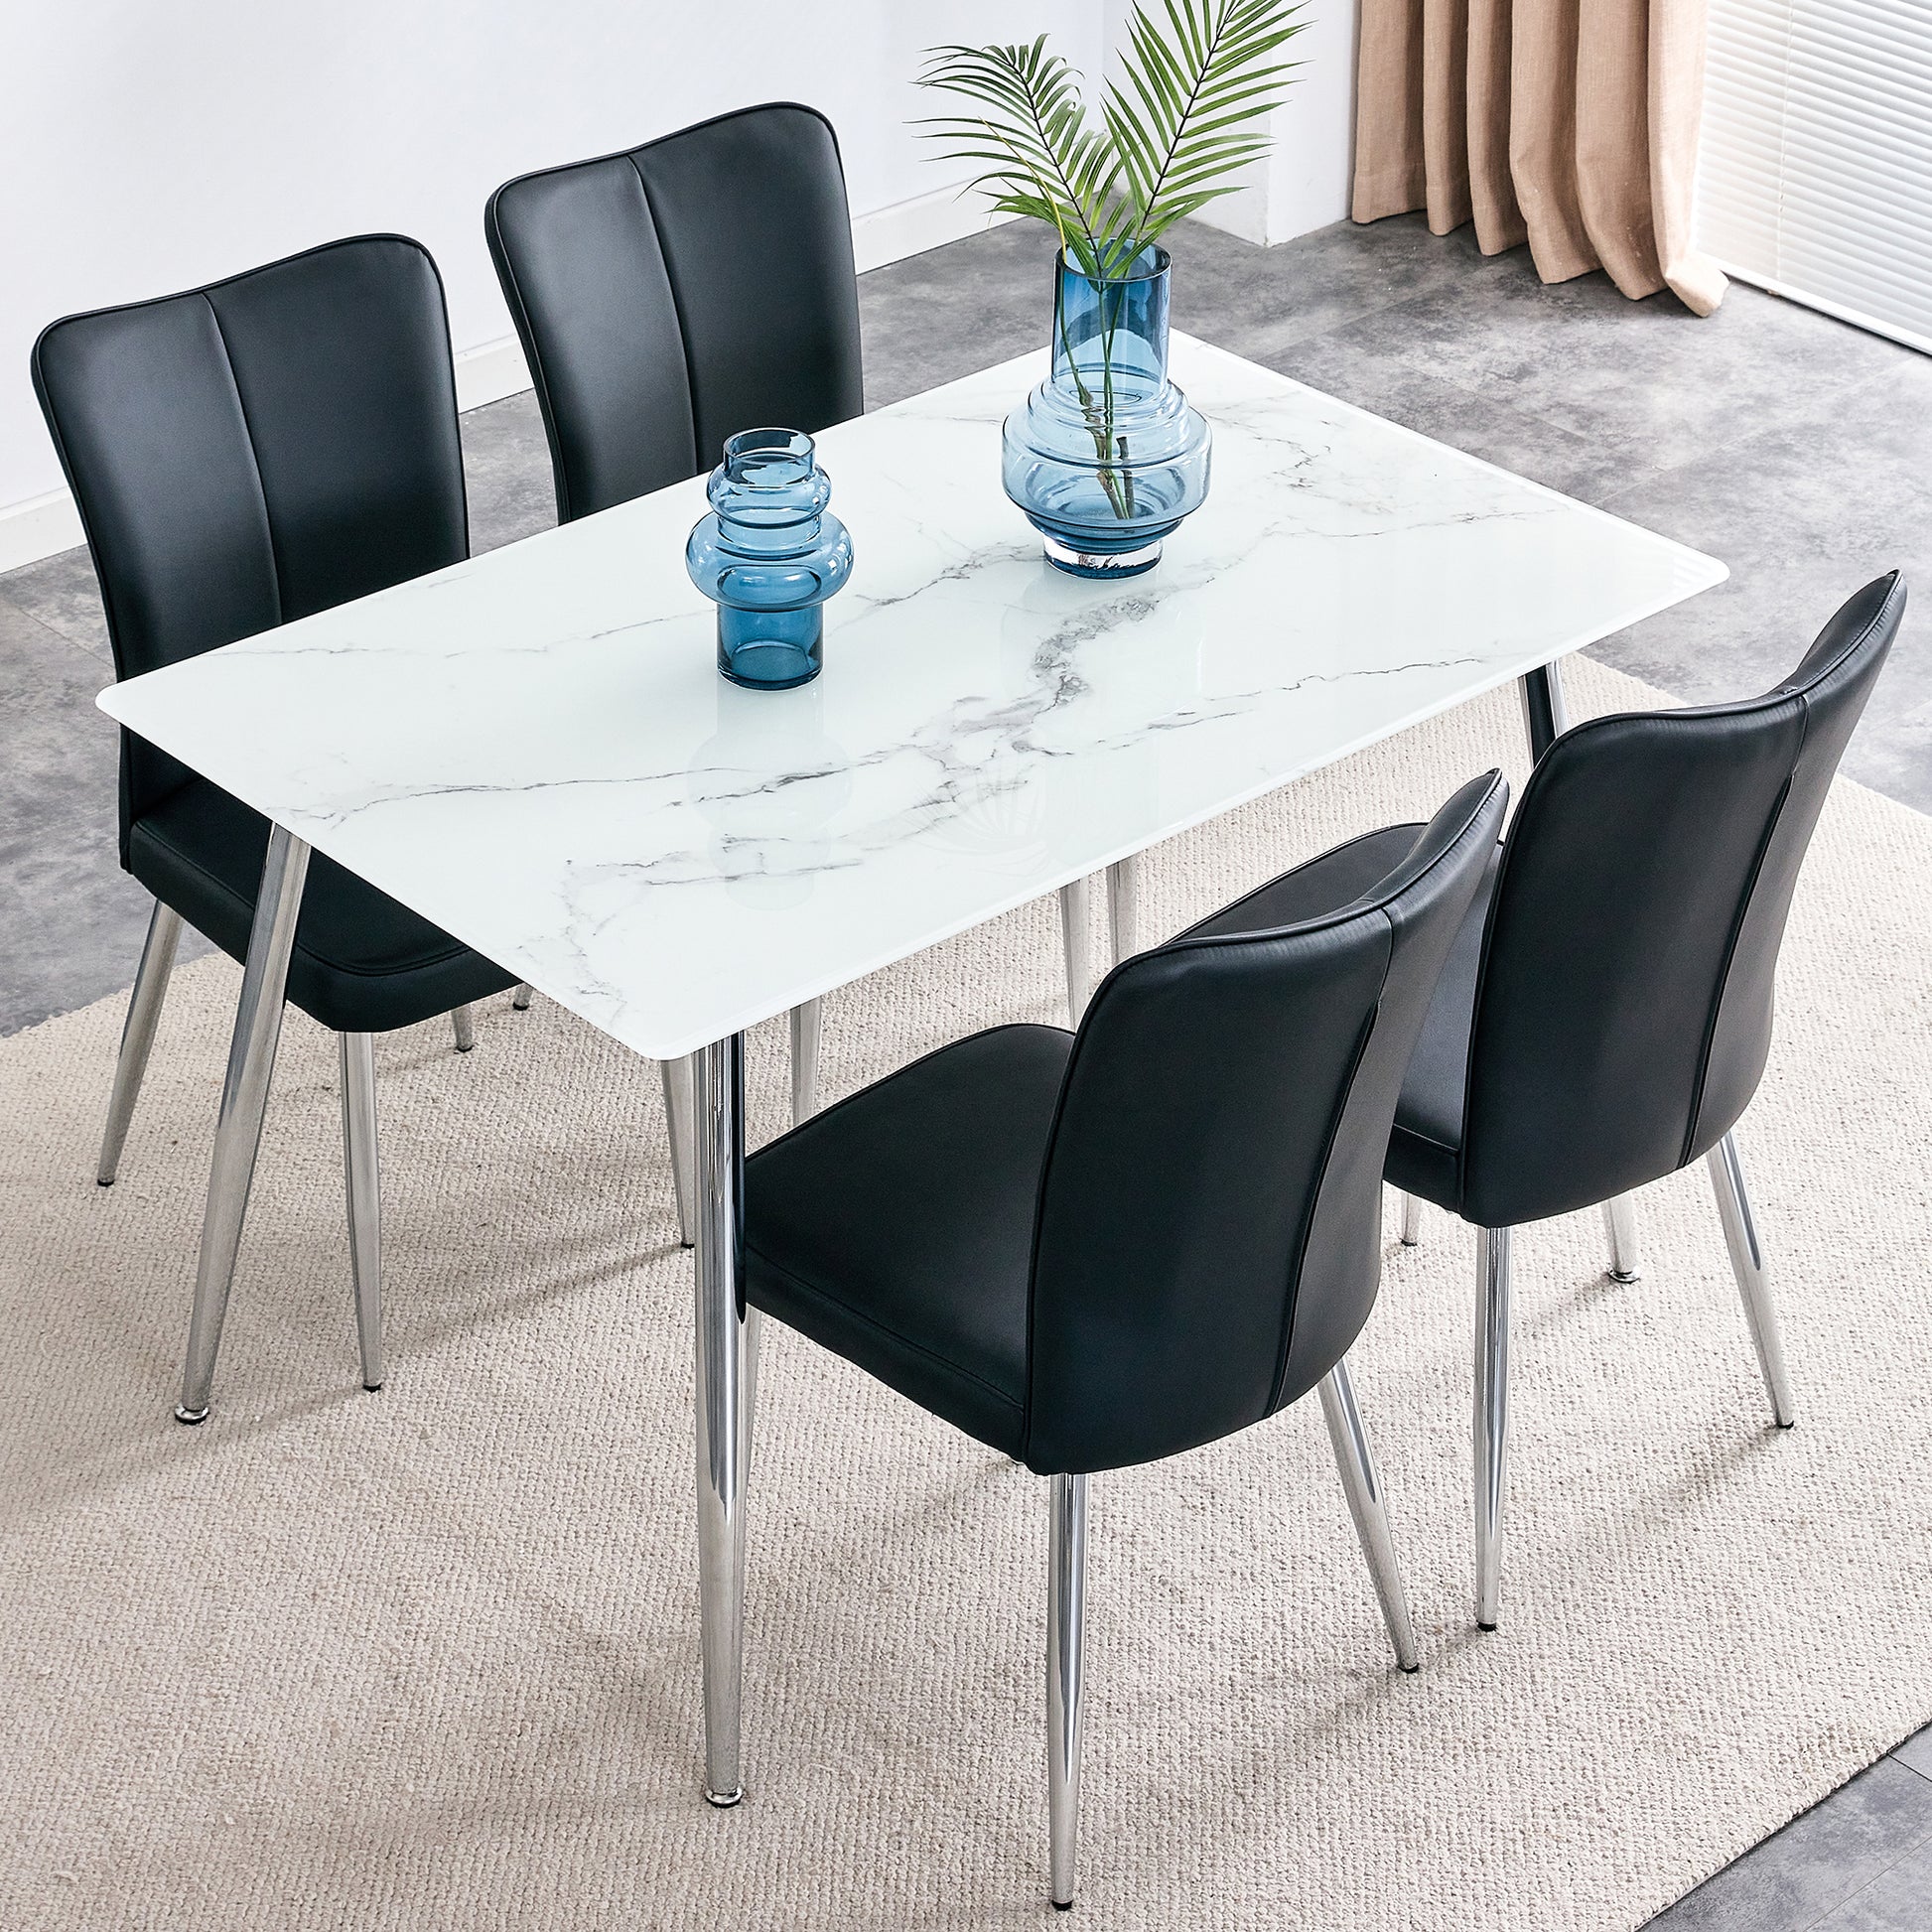 Table and chair set. 1 table with 4 black PU chairs. Modern minimalist rectangular white imitation marble dining table, 0.3 inches thick, with silver metal legs. Paired with 4 PU chairs   DT-1544 008 - Enova Luxe Home Store